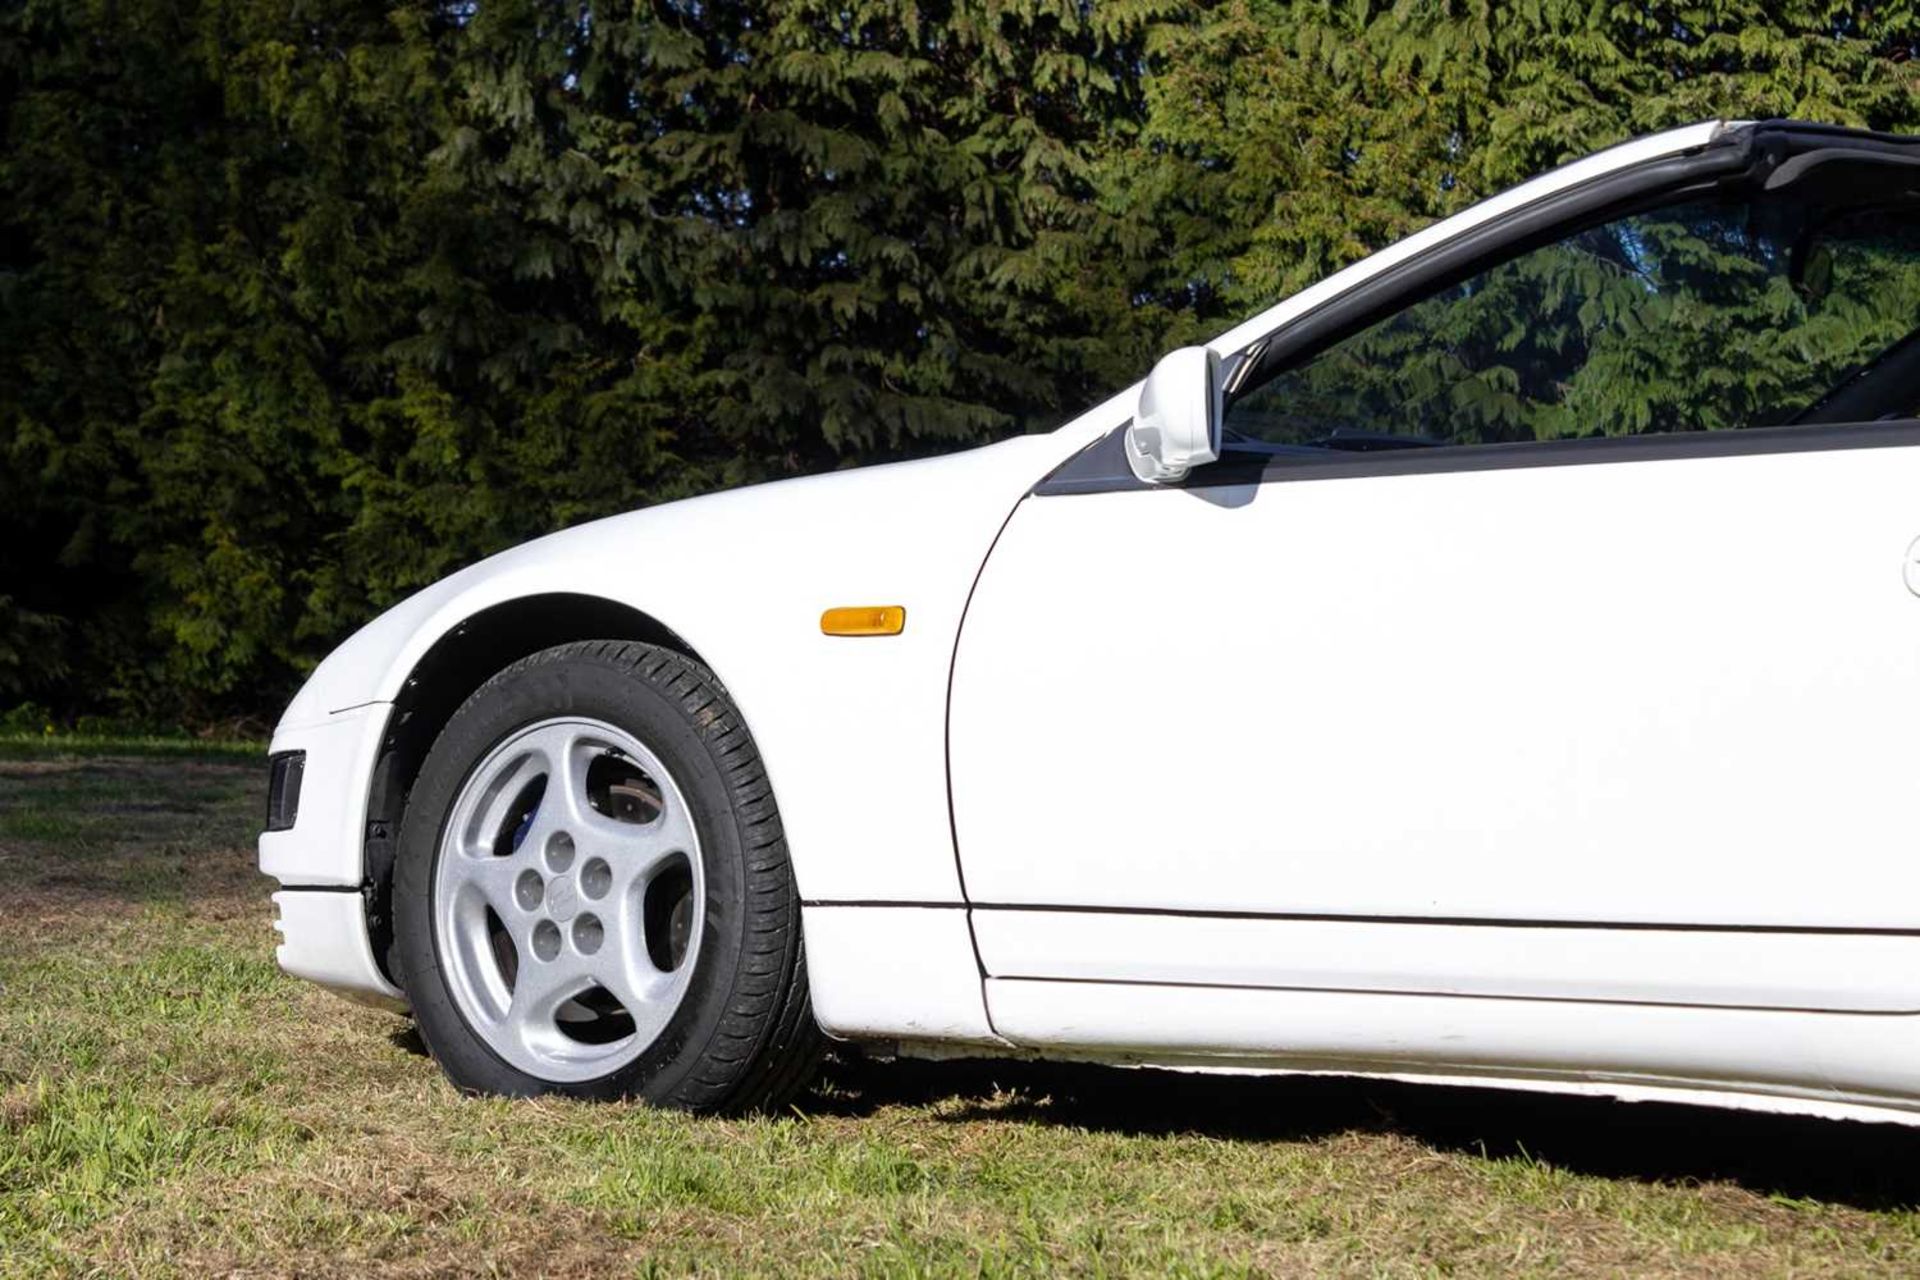 1990 Nissan 300ZX Turbo 2+2 Targa One of the last examples registered in the UK - Image 31 of 89